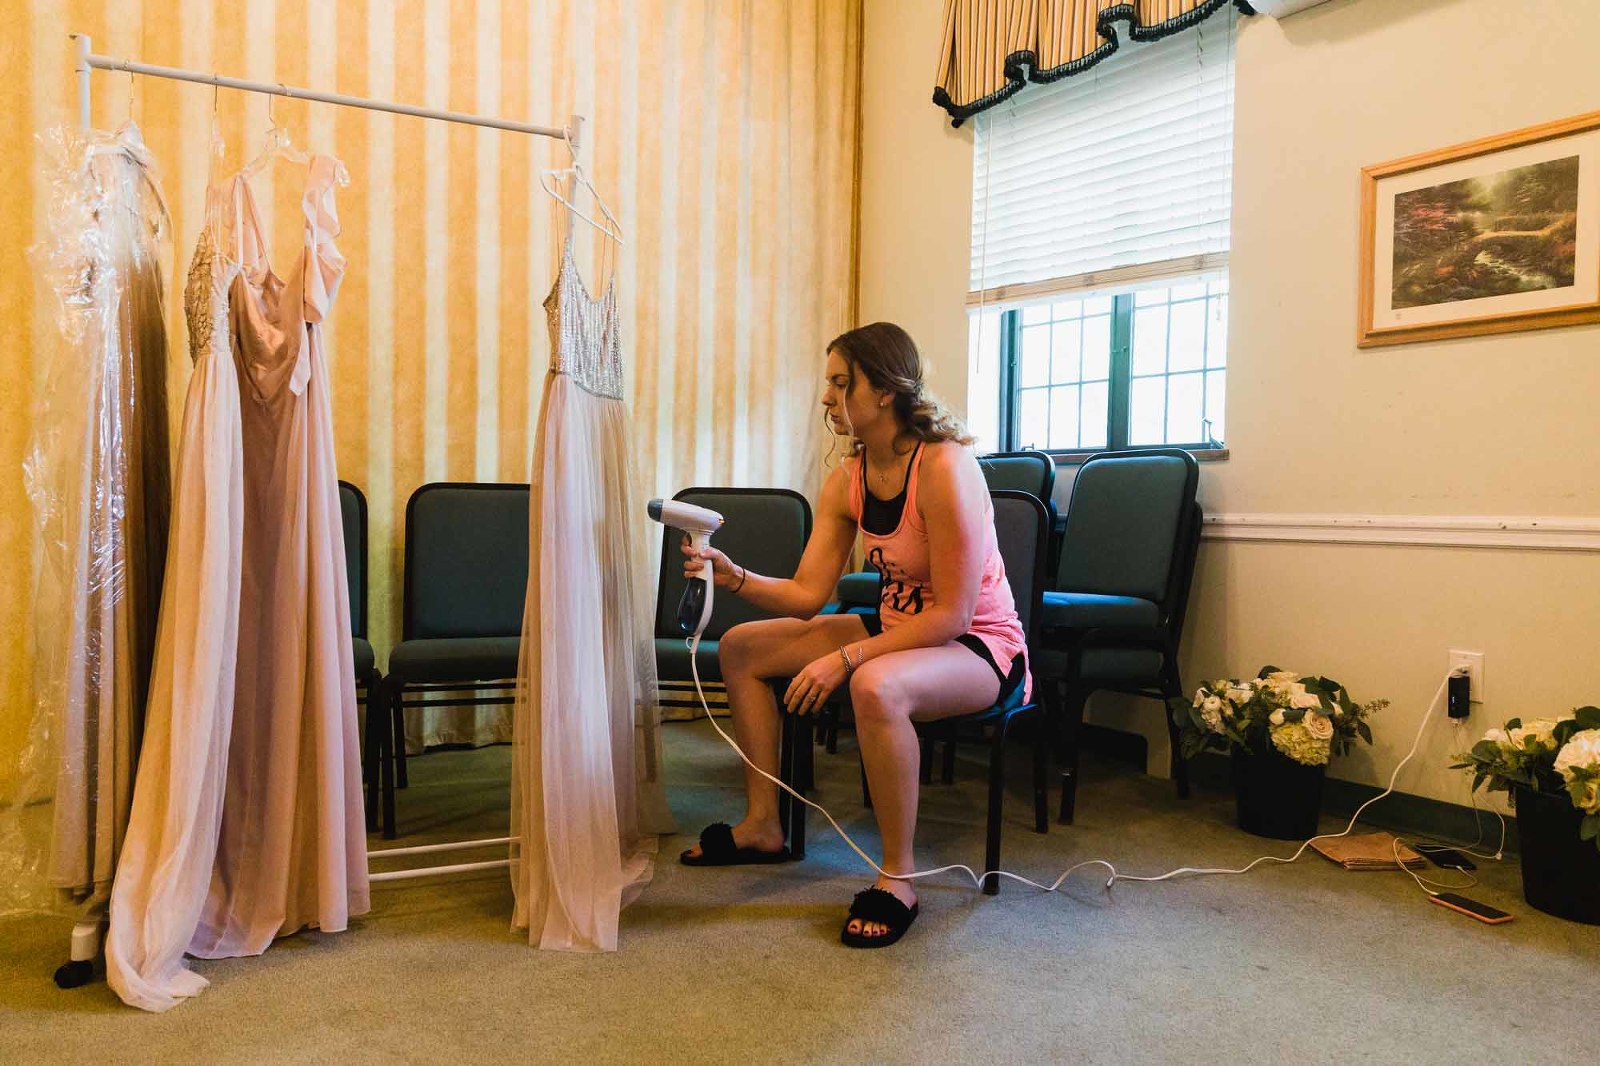 bridesmaid prepares the bridesmaid dresses with steam cleaner, before wedding ceremony, in church basement at beverly heights presbyterian in mount lebanon, pa